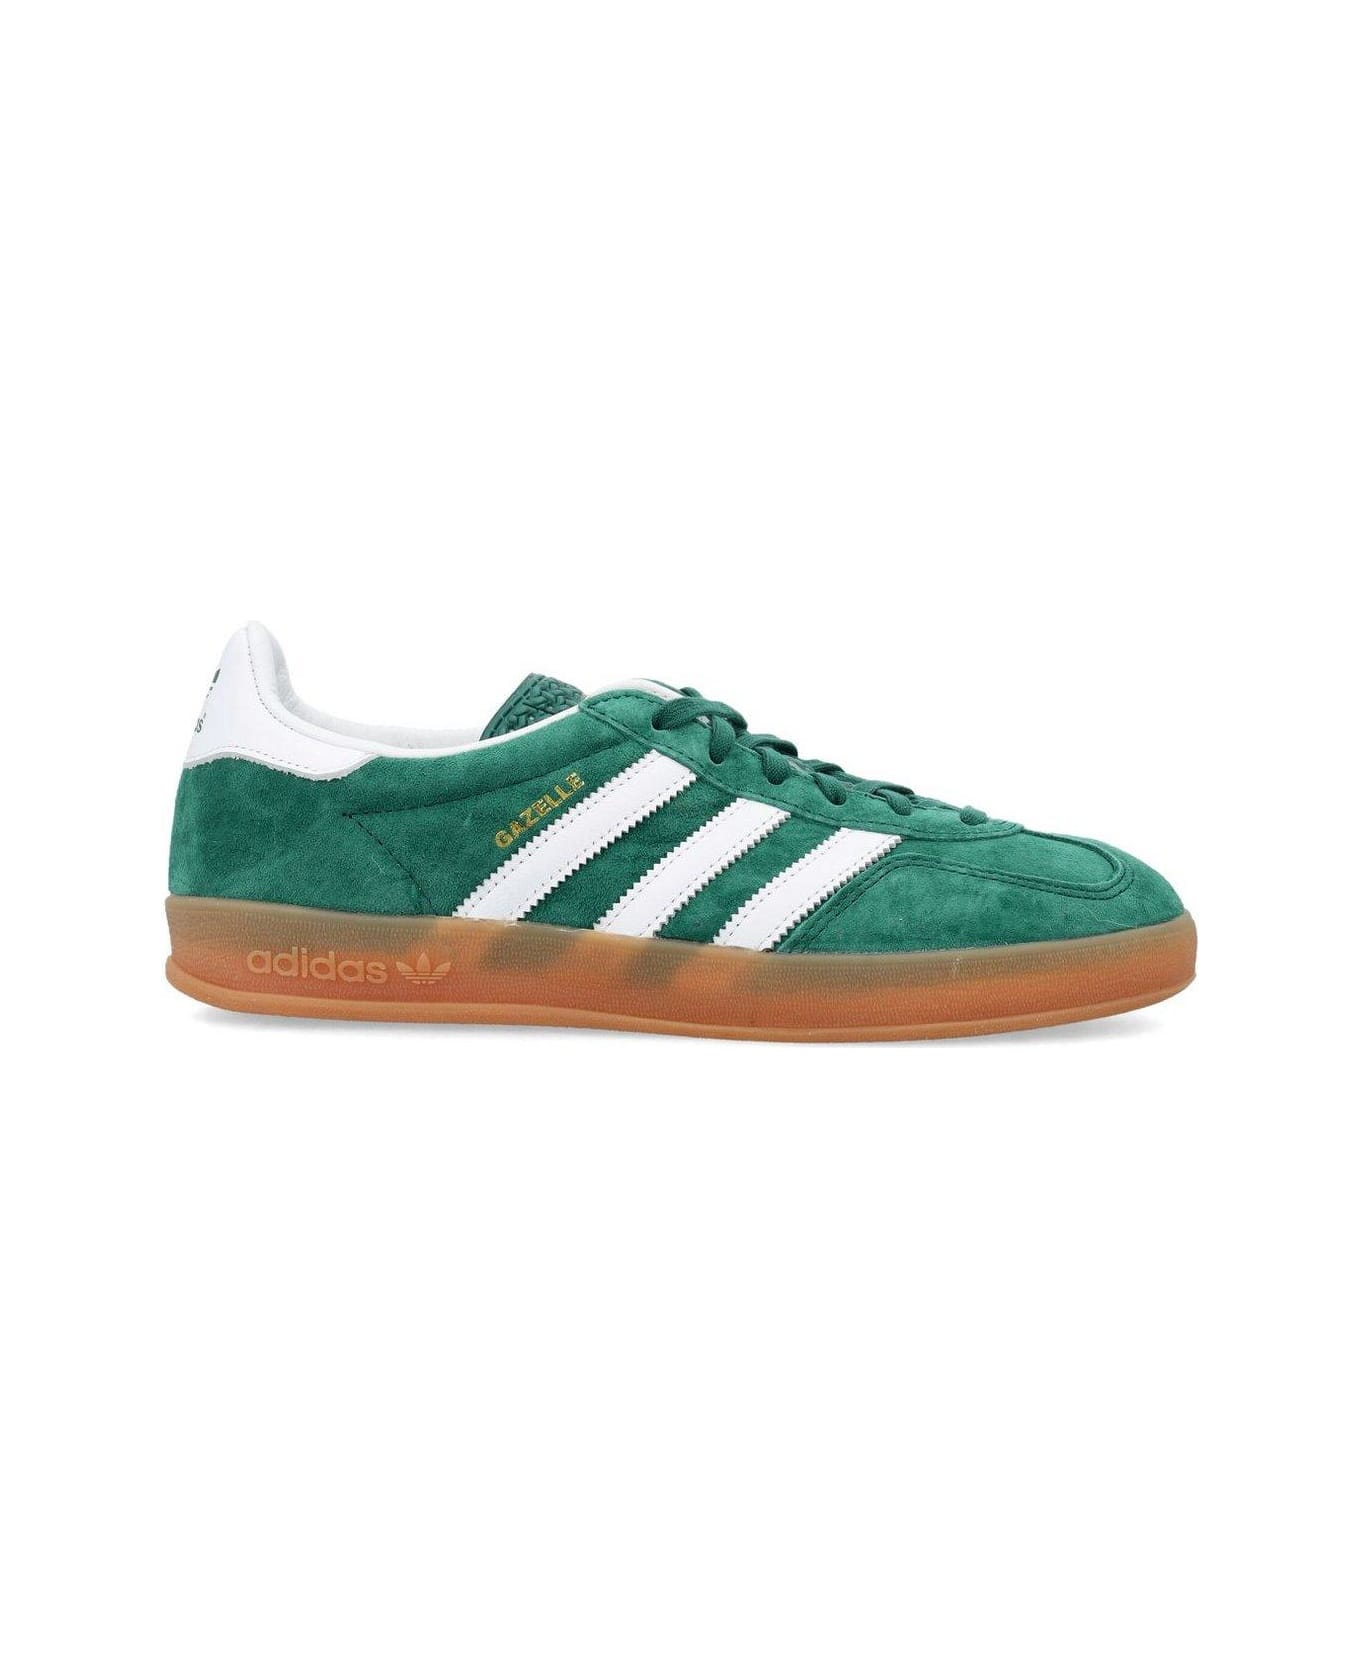 Adidas Round Toe Lace-up Sneakers - Cgreen/ftwwht/gum2